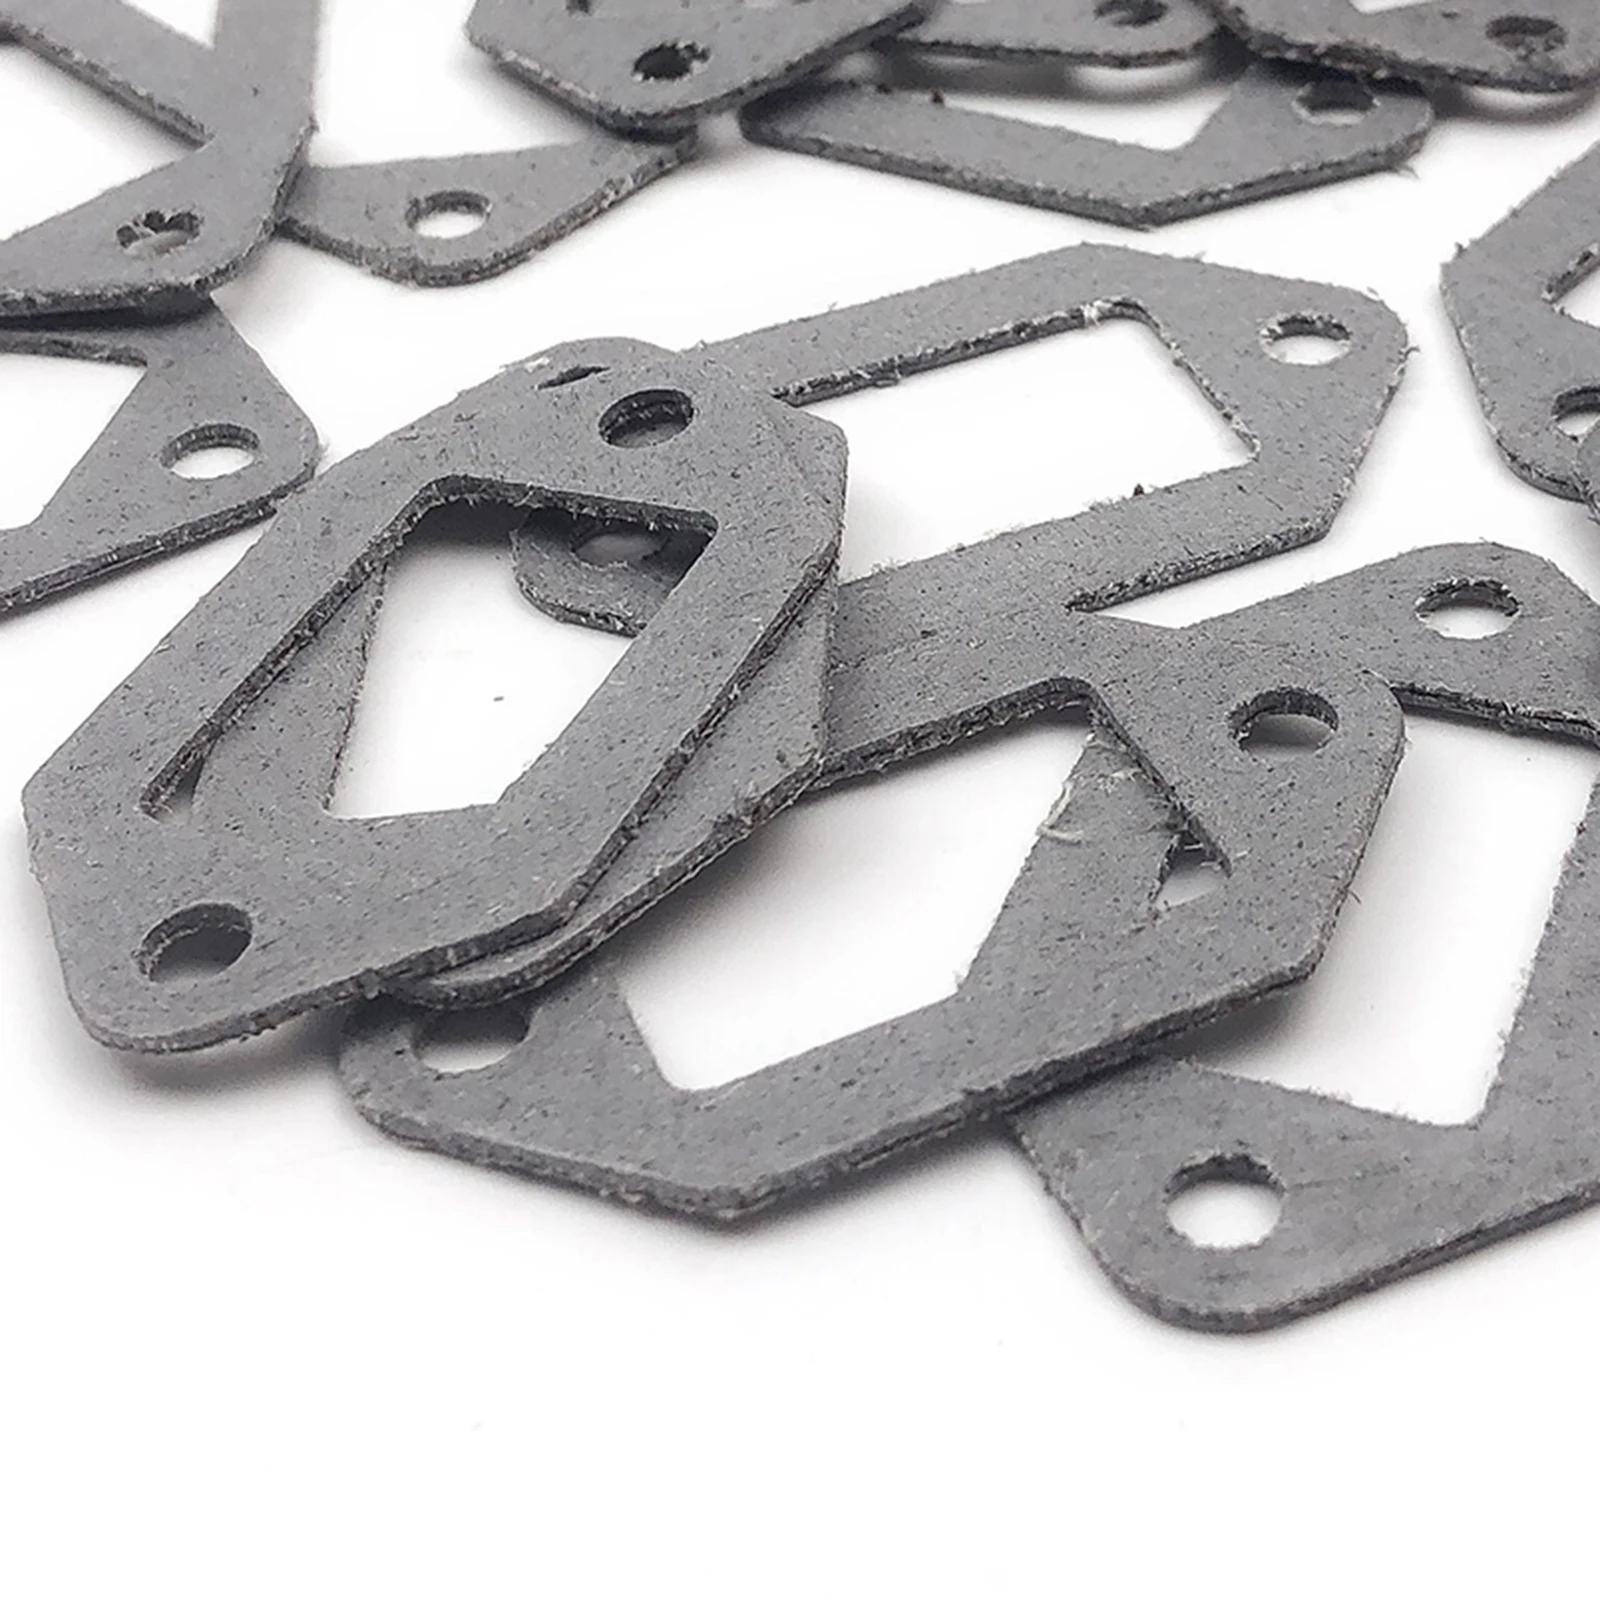 20Pieces Muffler Gasket Replacements Accessory for stihl MS380 MS381 MS440 MS441 MS460 MS650